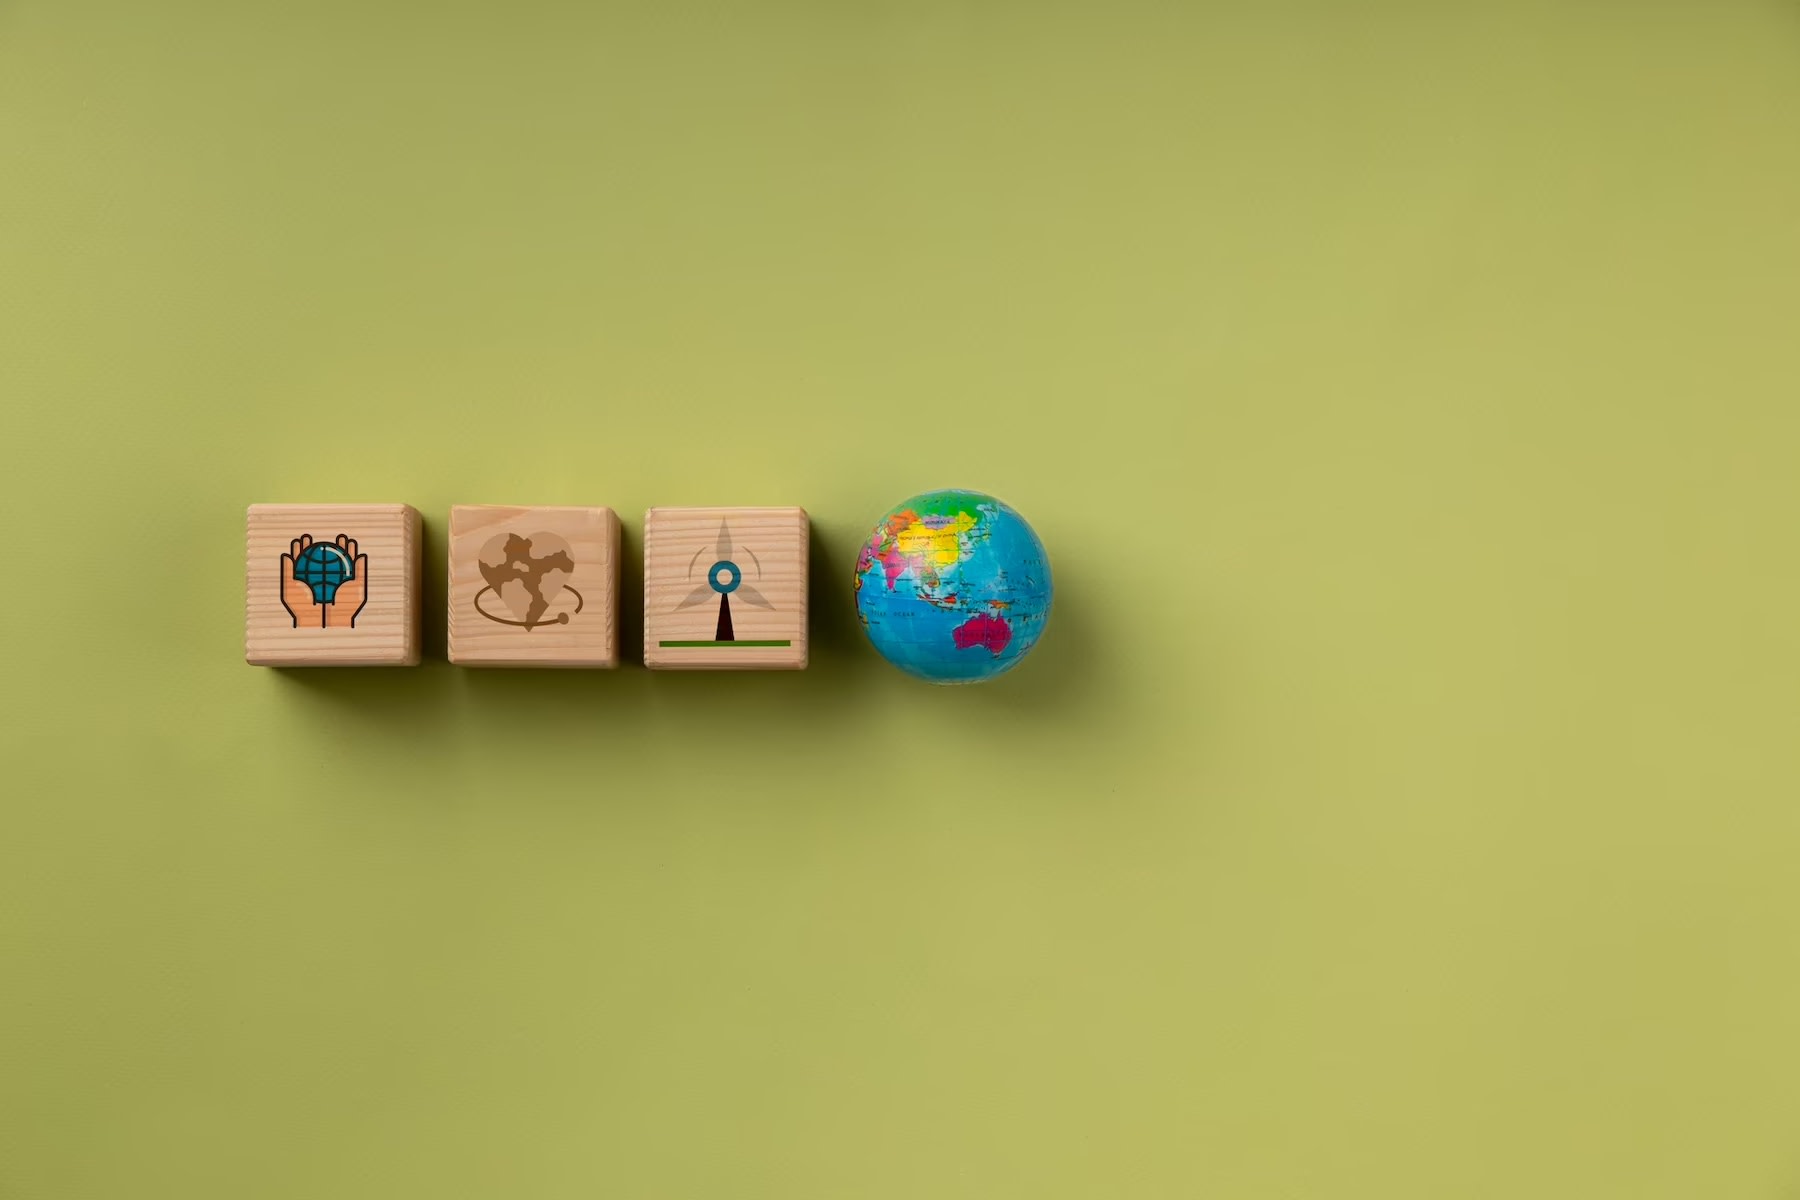 Image of SDG wooden blocks that lead to a globe of Earth